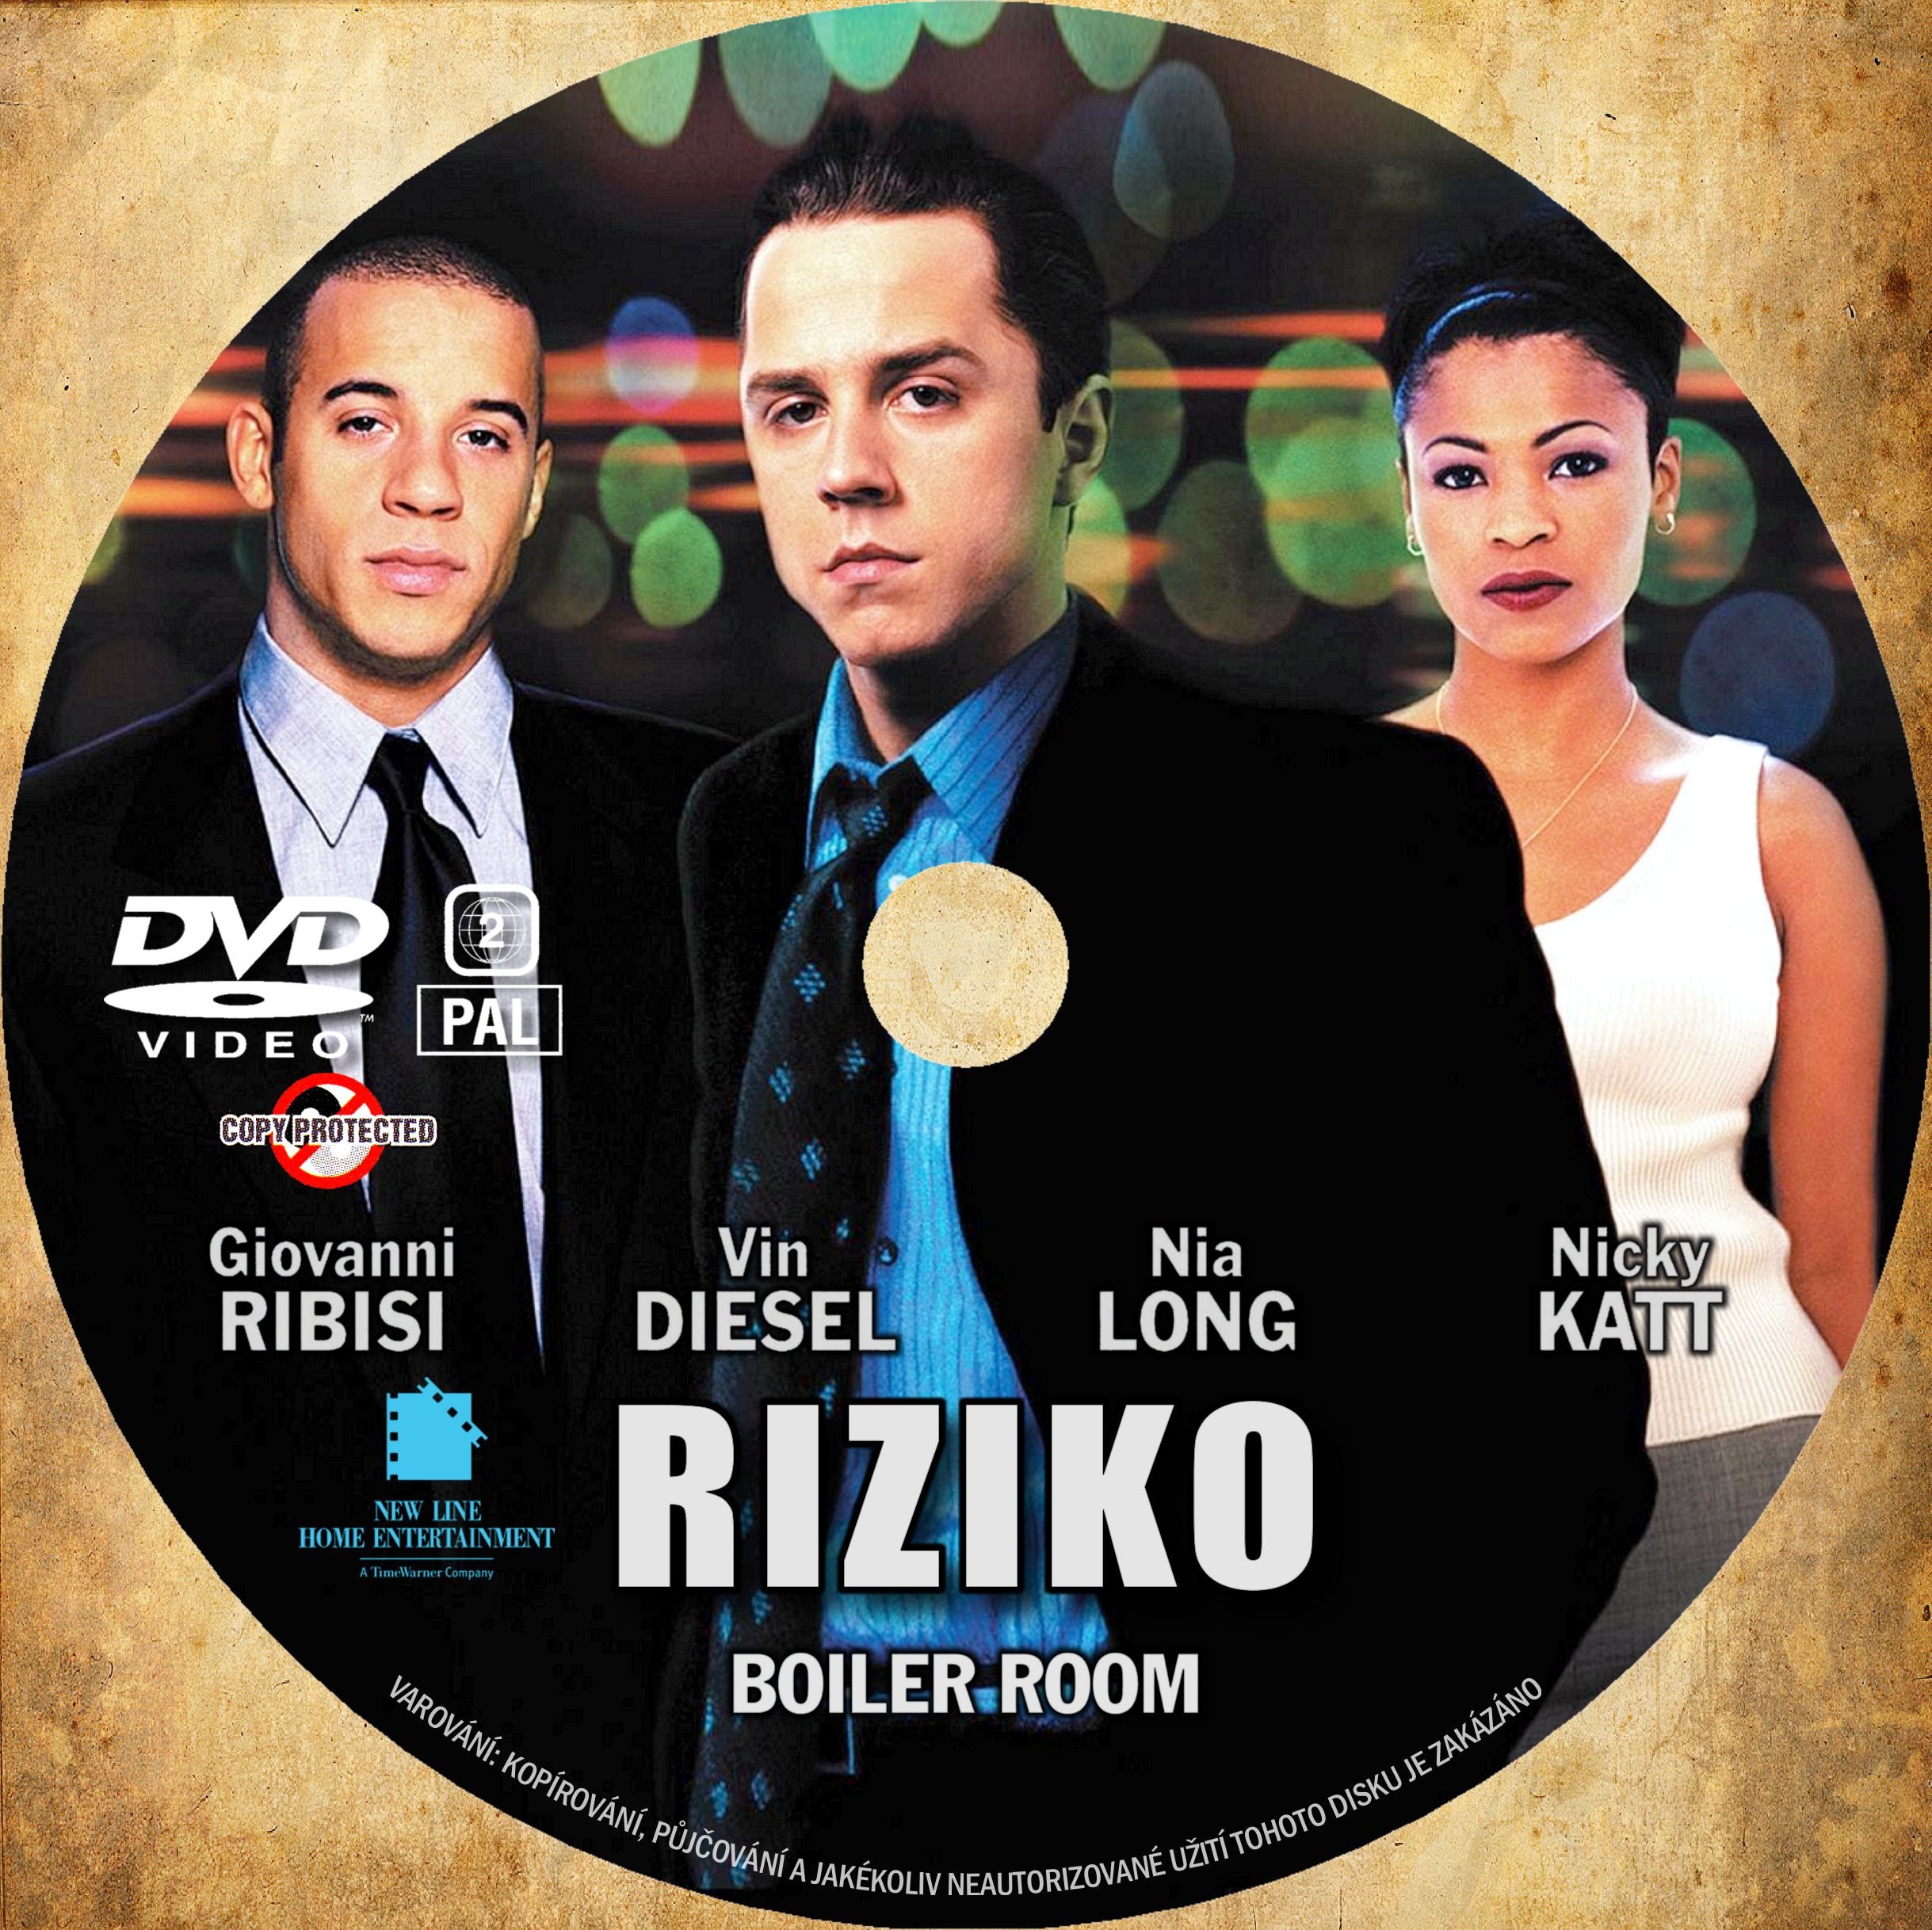 Covers Box Sk Boiler Room 2000 High Quality Dvd